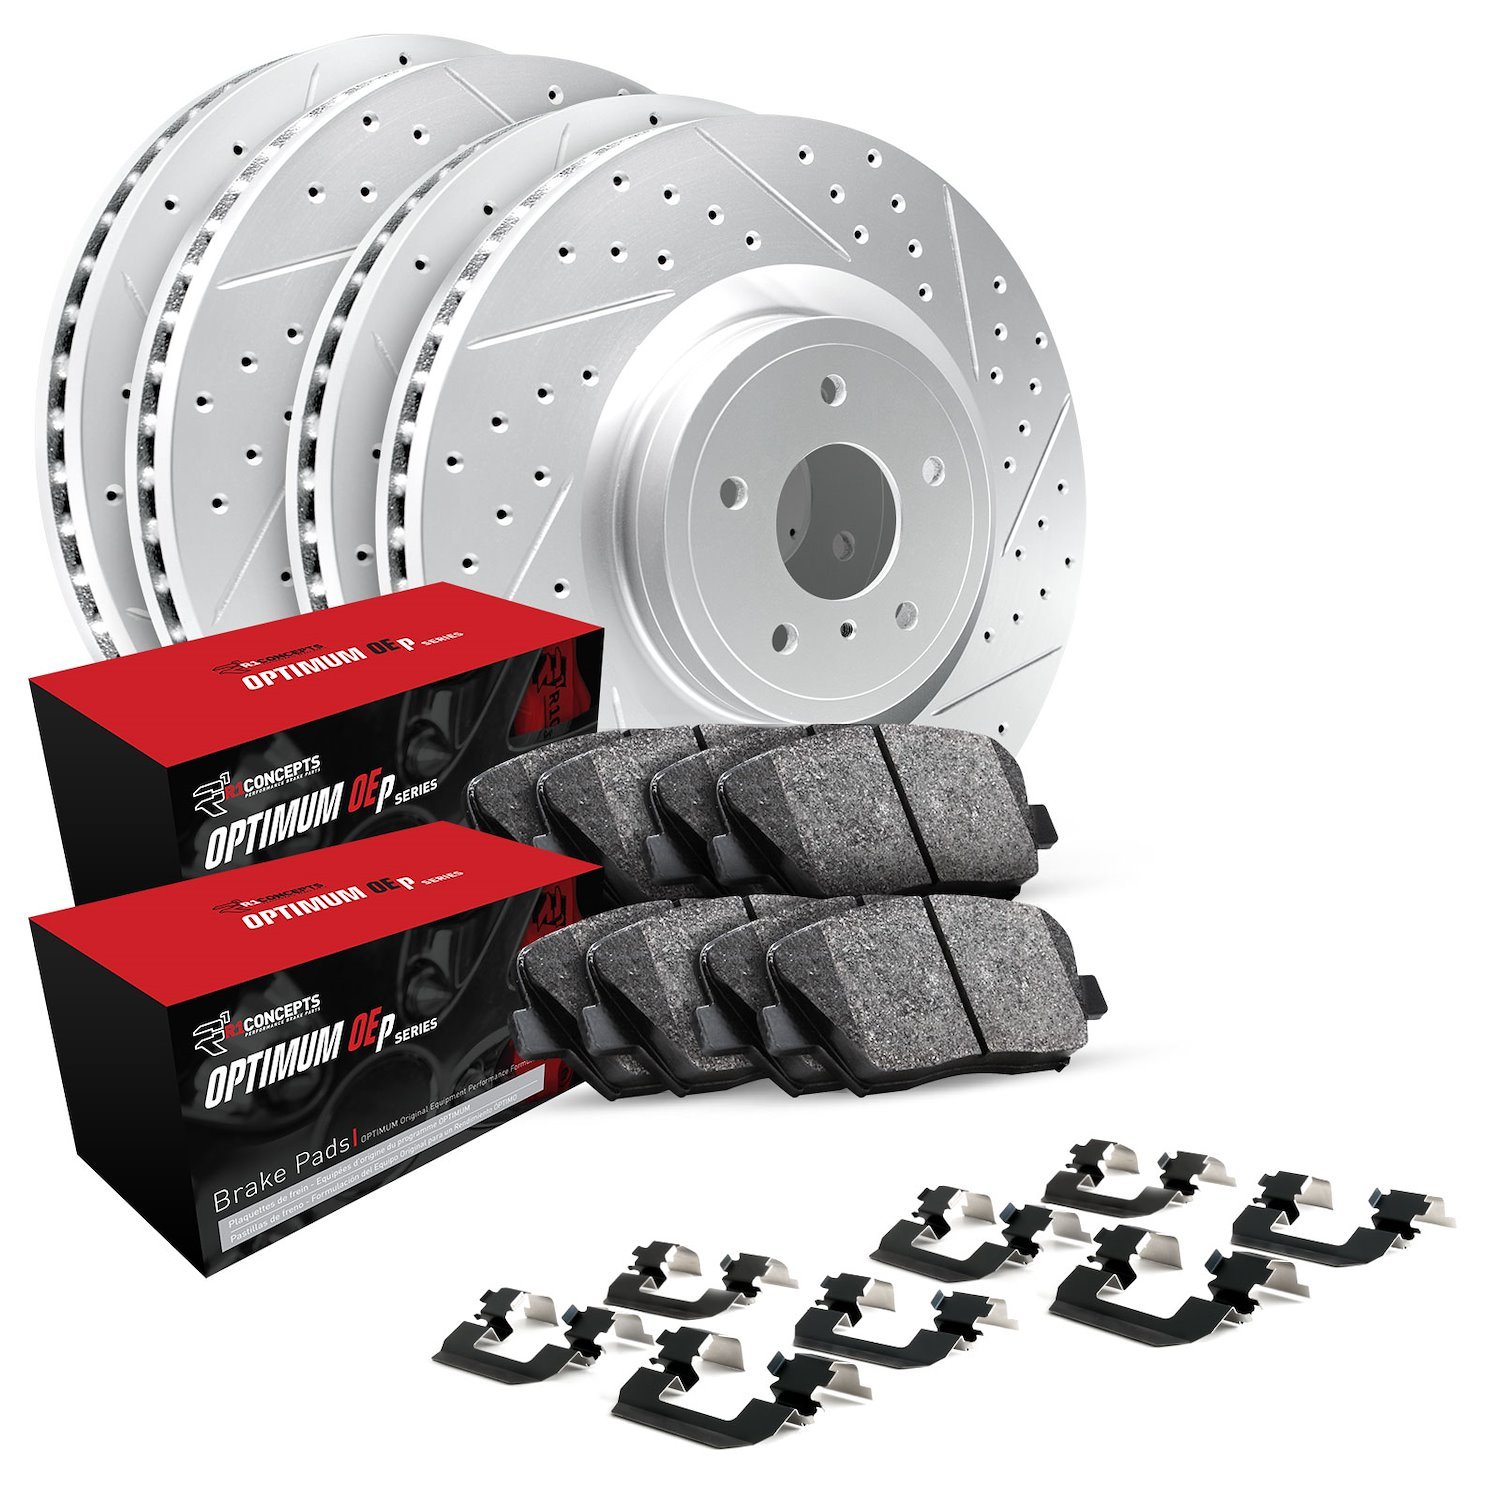 GEO-Carbon Drilled/Slotted Rotors/Drums w/Optimum OE Pads/Shoes/Hardware, 2001-2004 Suzuki, Position: Front/Rear